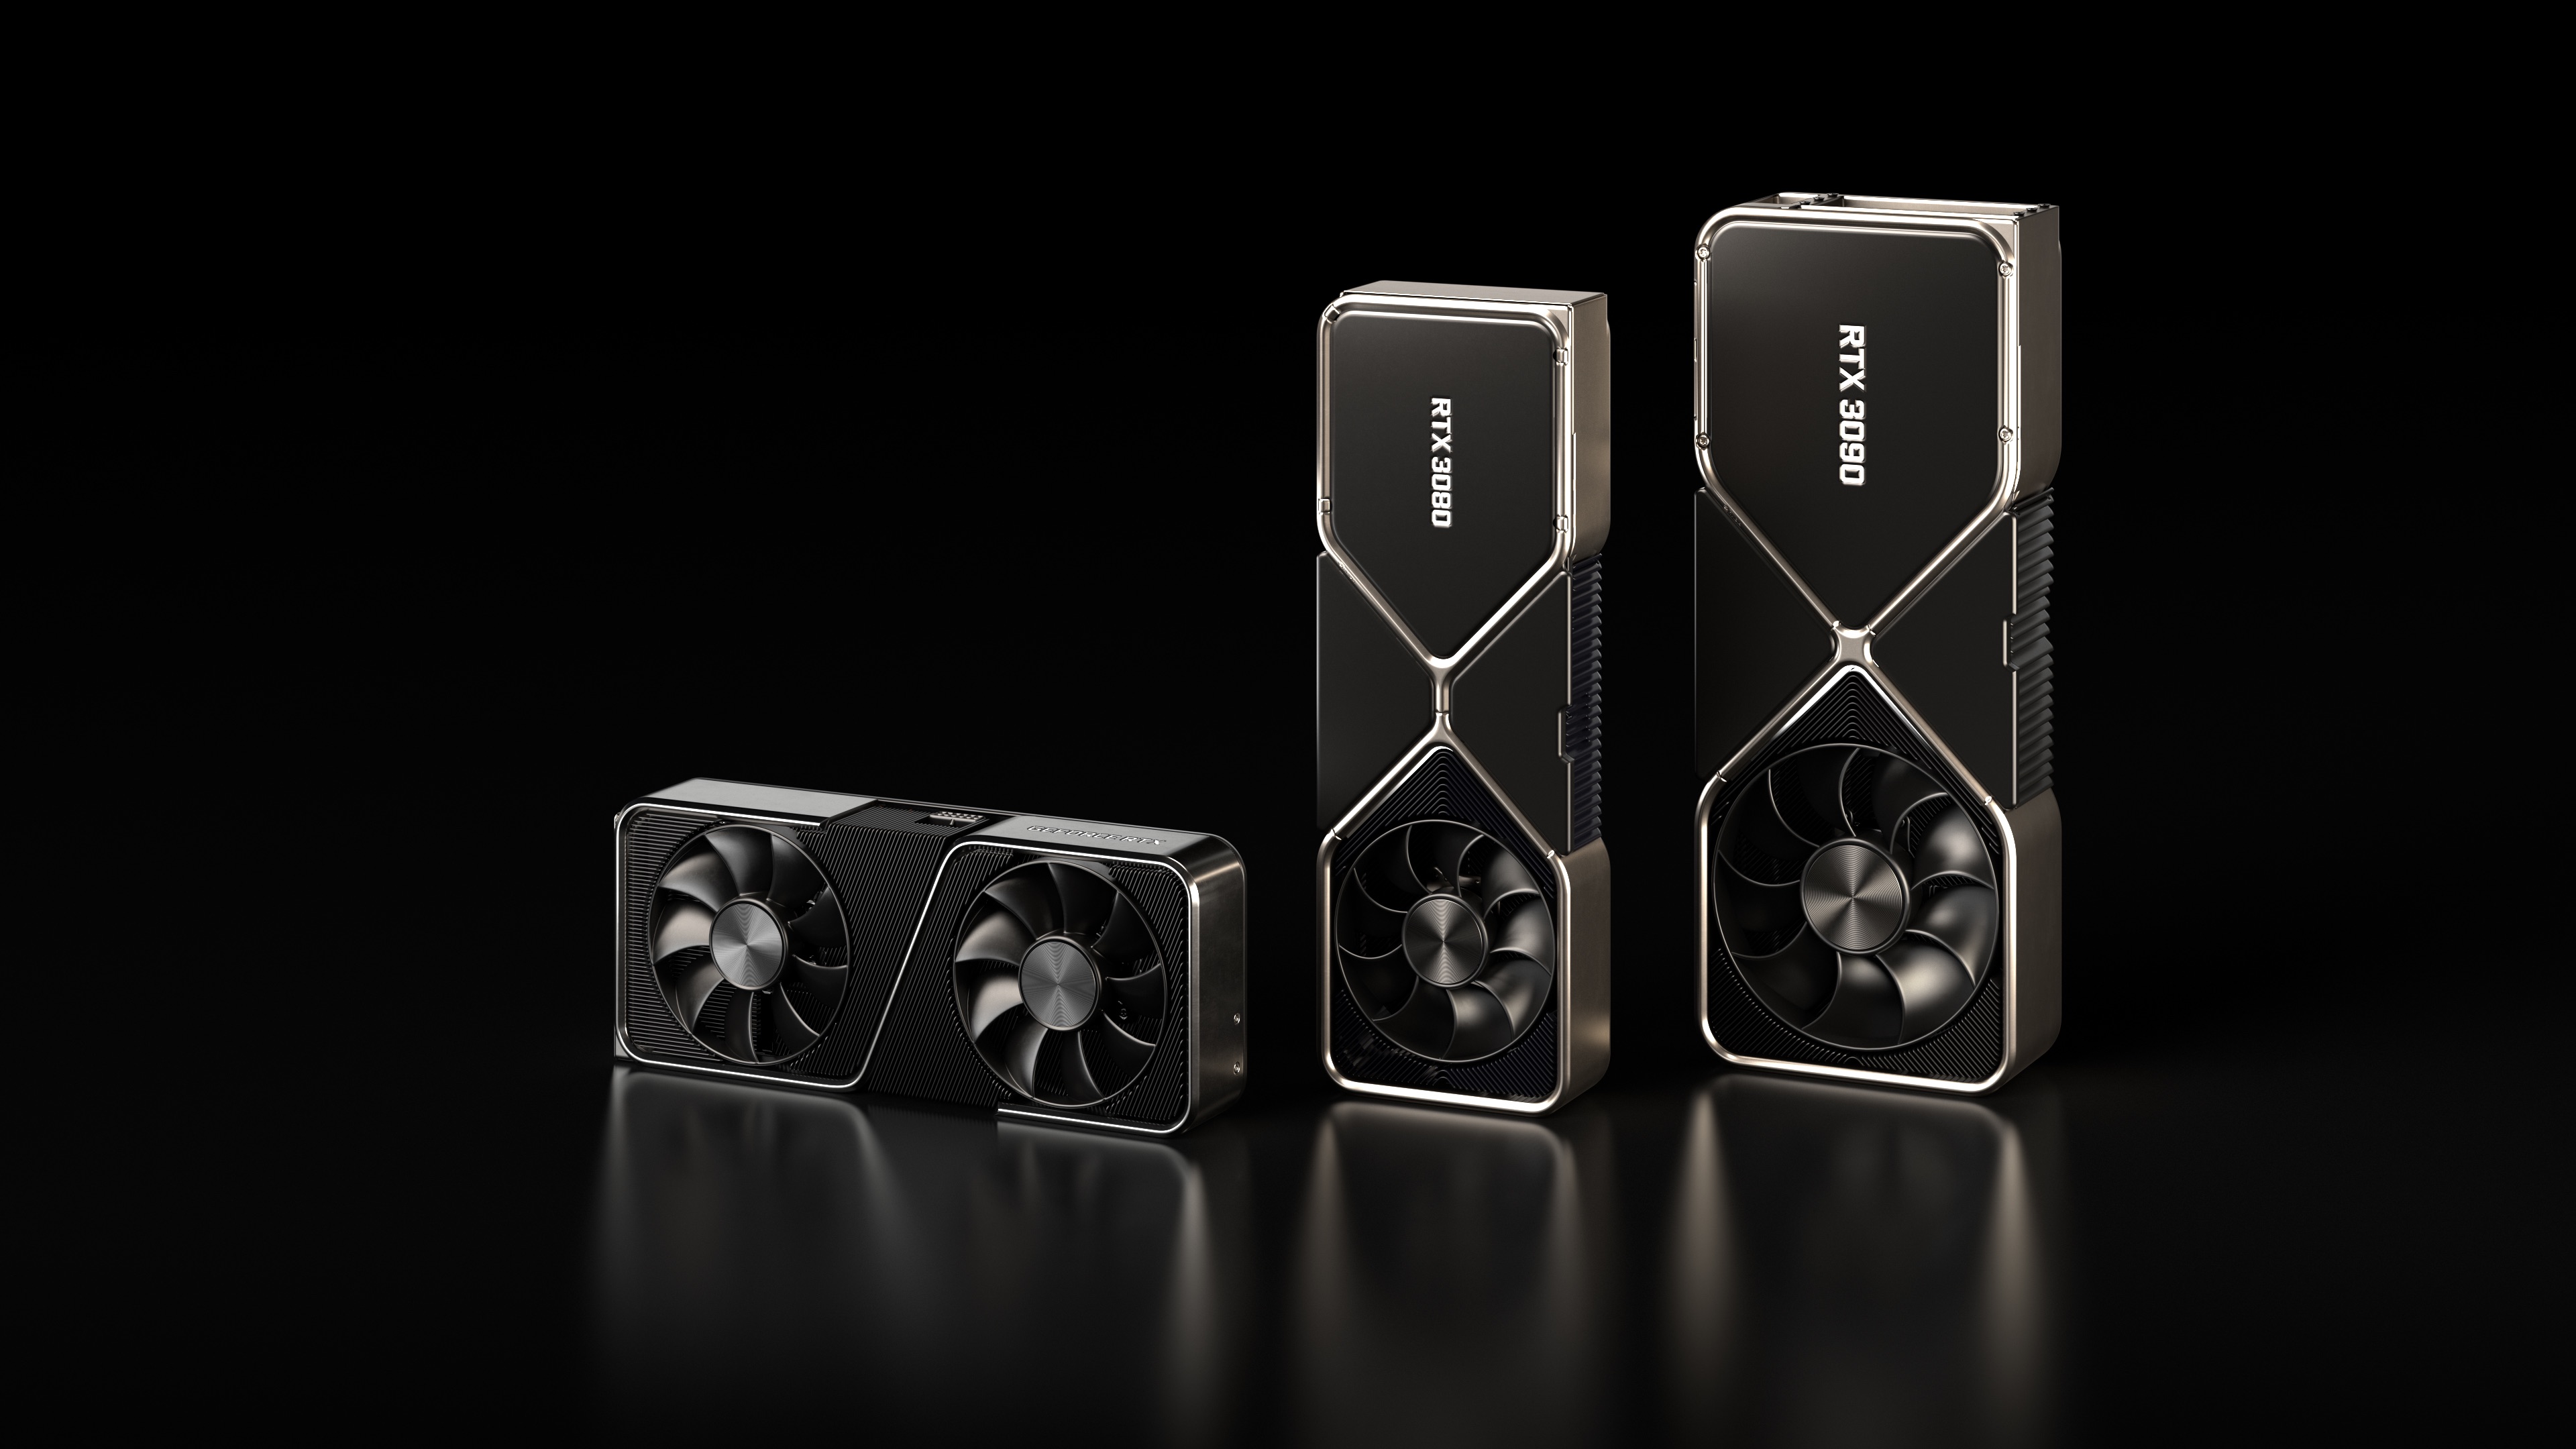 Nvidia RTX GeForce GPU Ray Tracing Chips Computer PC Gaming Founders Edition Series Graphics Card Te 3840x2160